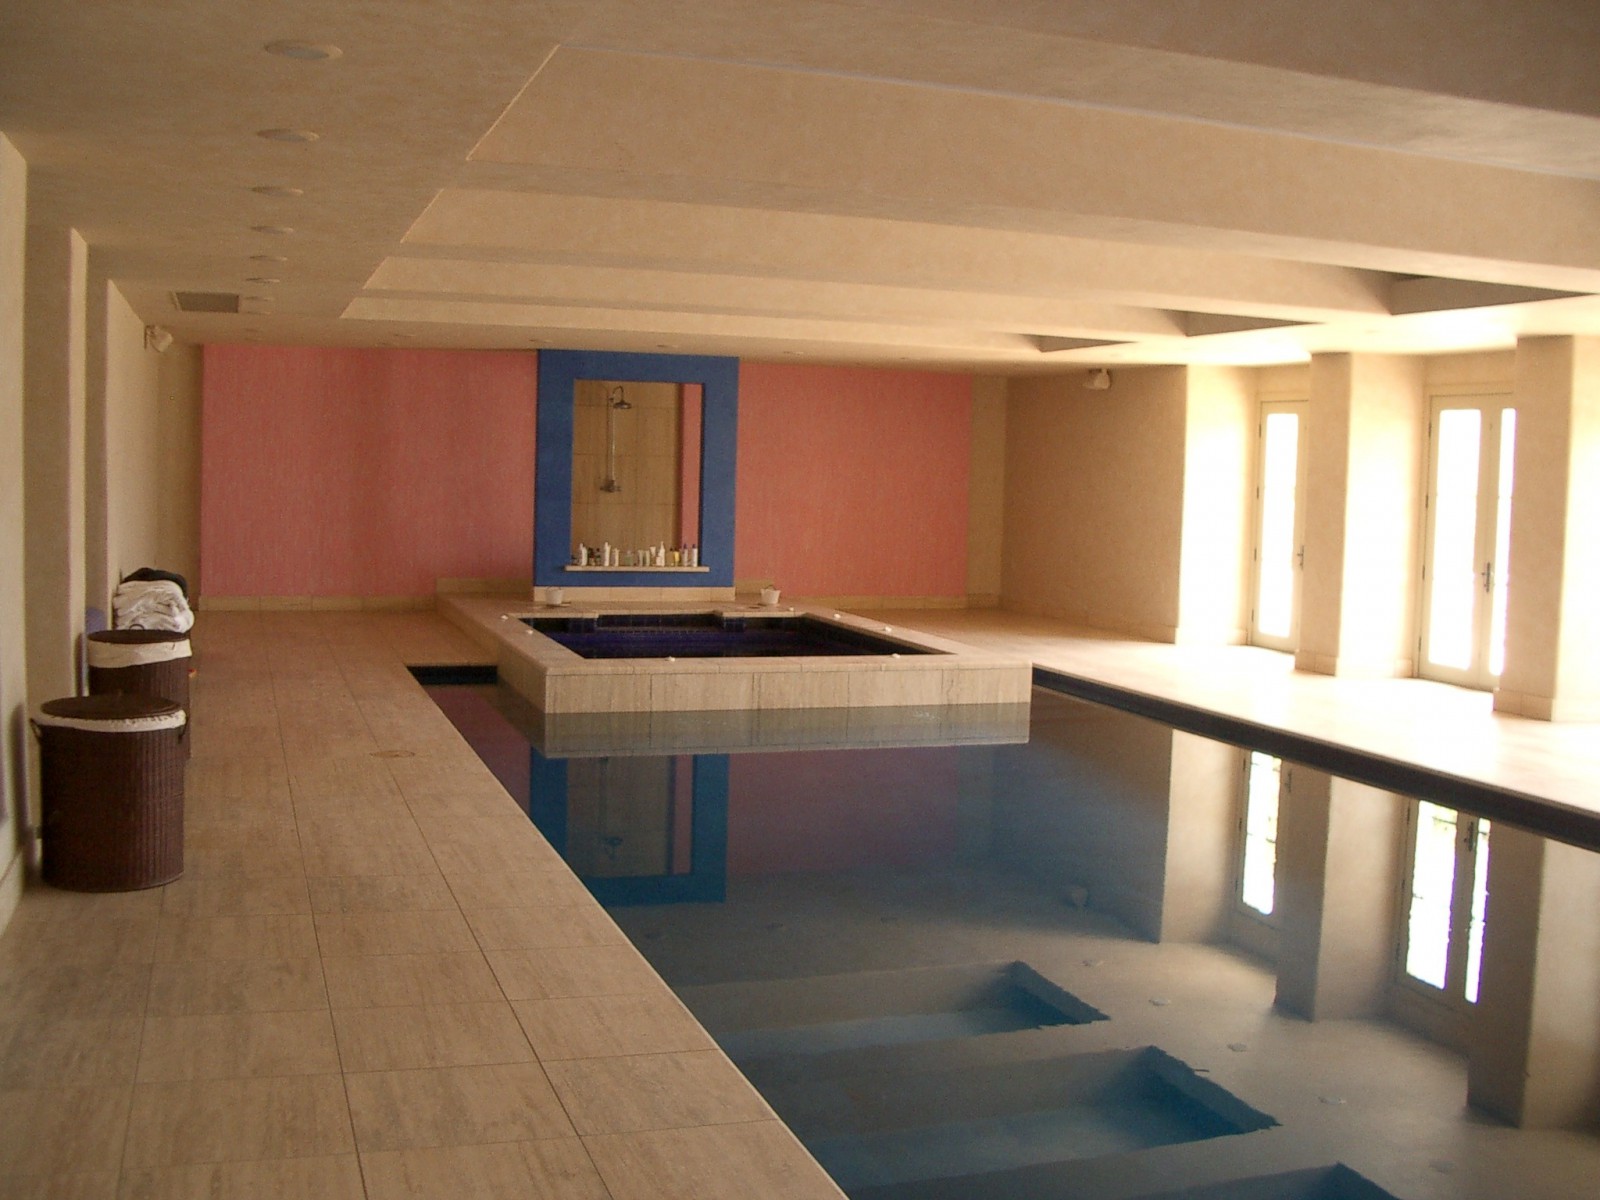 The indoor swimming pool hosted many parties